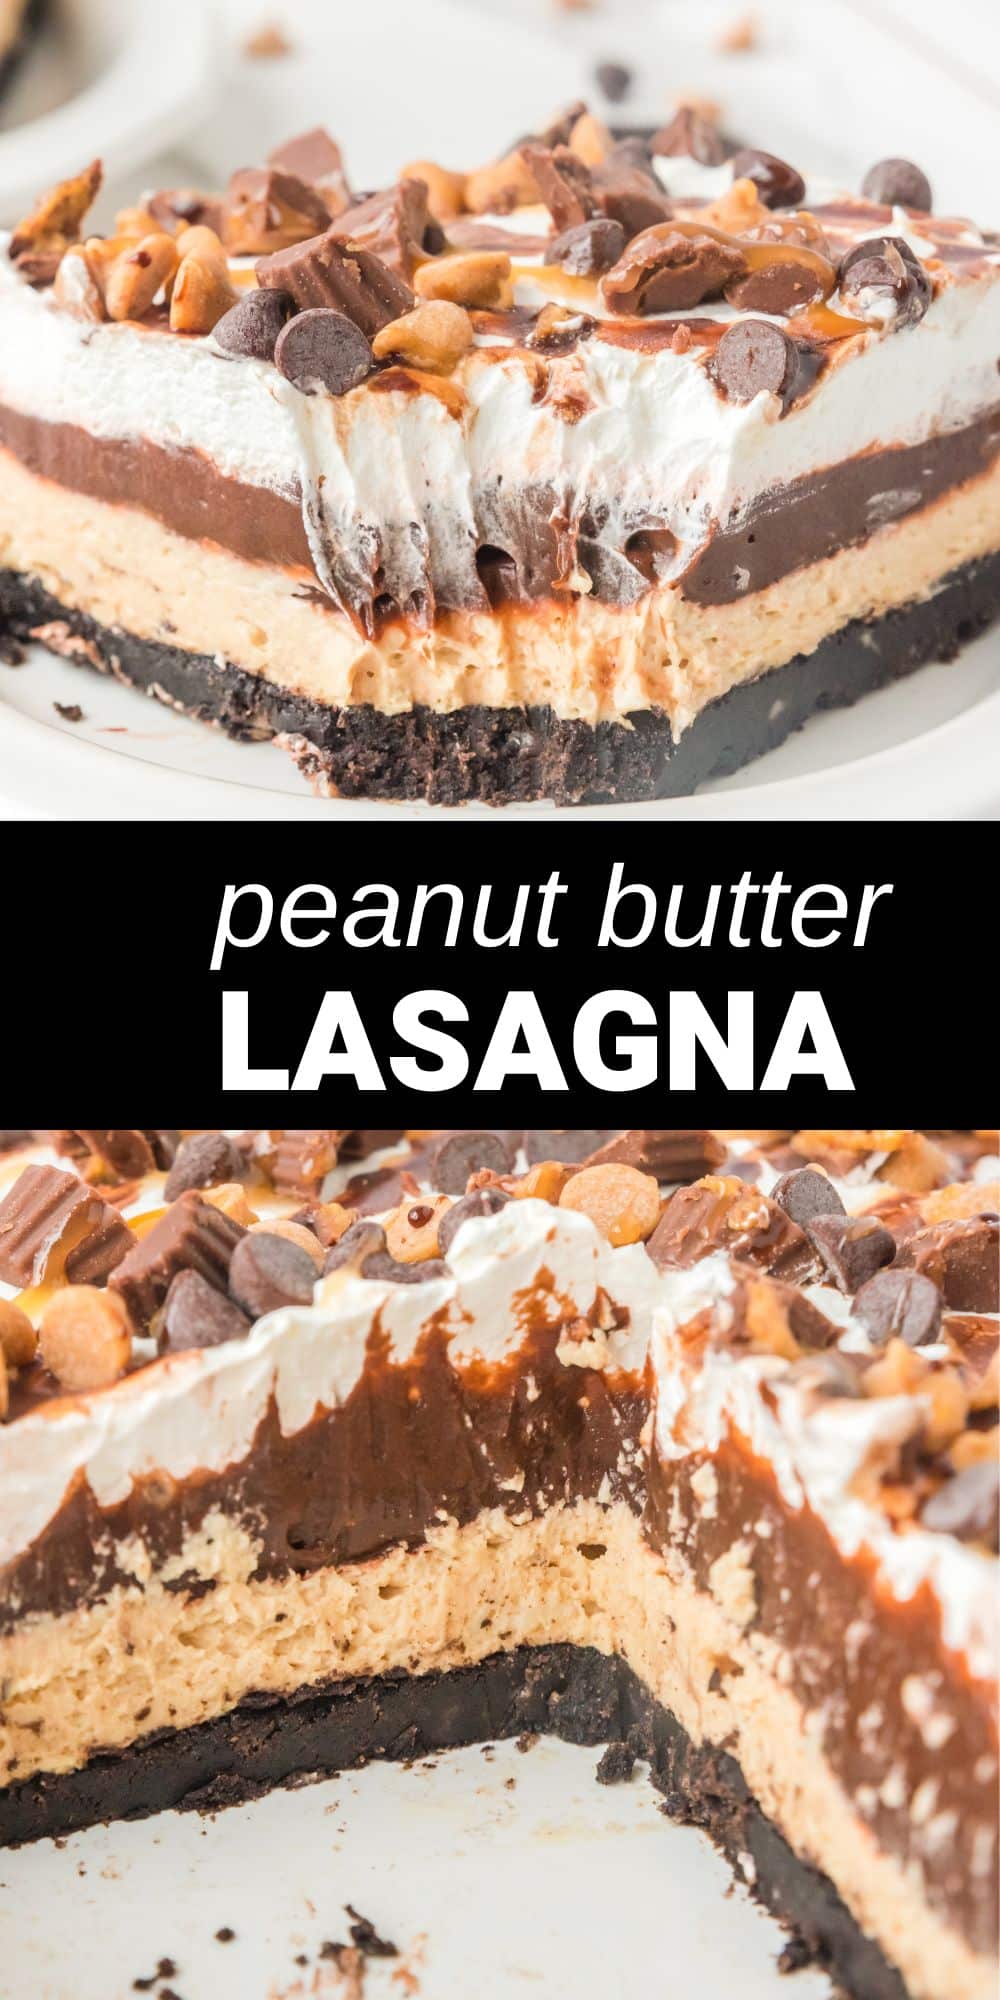 This Peanut Butter Lasagna is an easy 4-layer dessert that'll have peanut butter fans rejoicing! A chocolate cookie crust is piled up with a decadent cream cheese and peanut butter filling, a rich chocolate pudding layer, and topped with whipped cream and sweet garnishes, for one dessert you’ll never forget. 